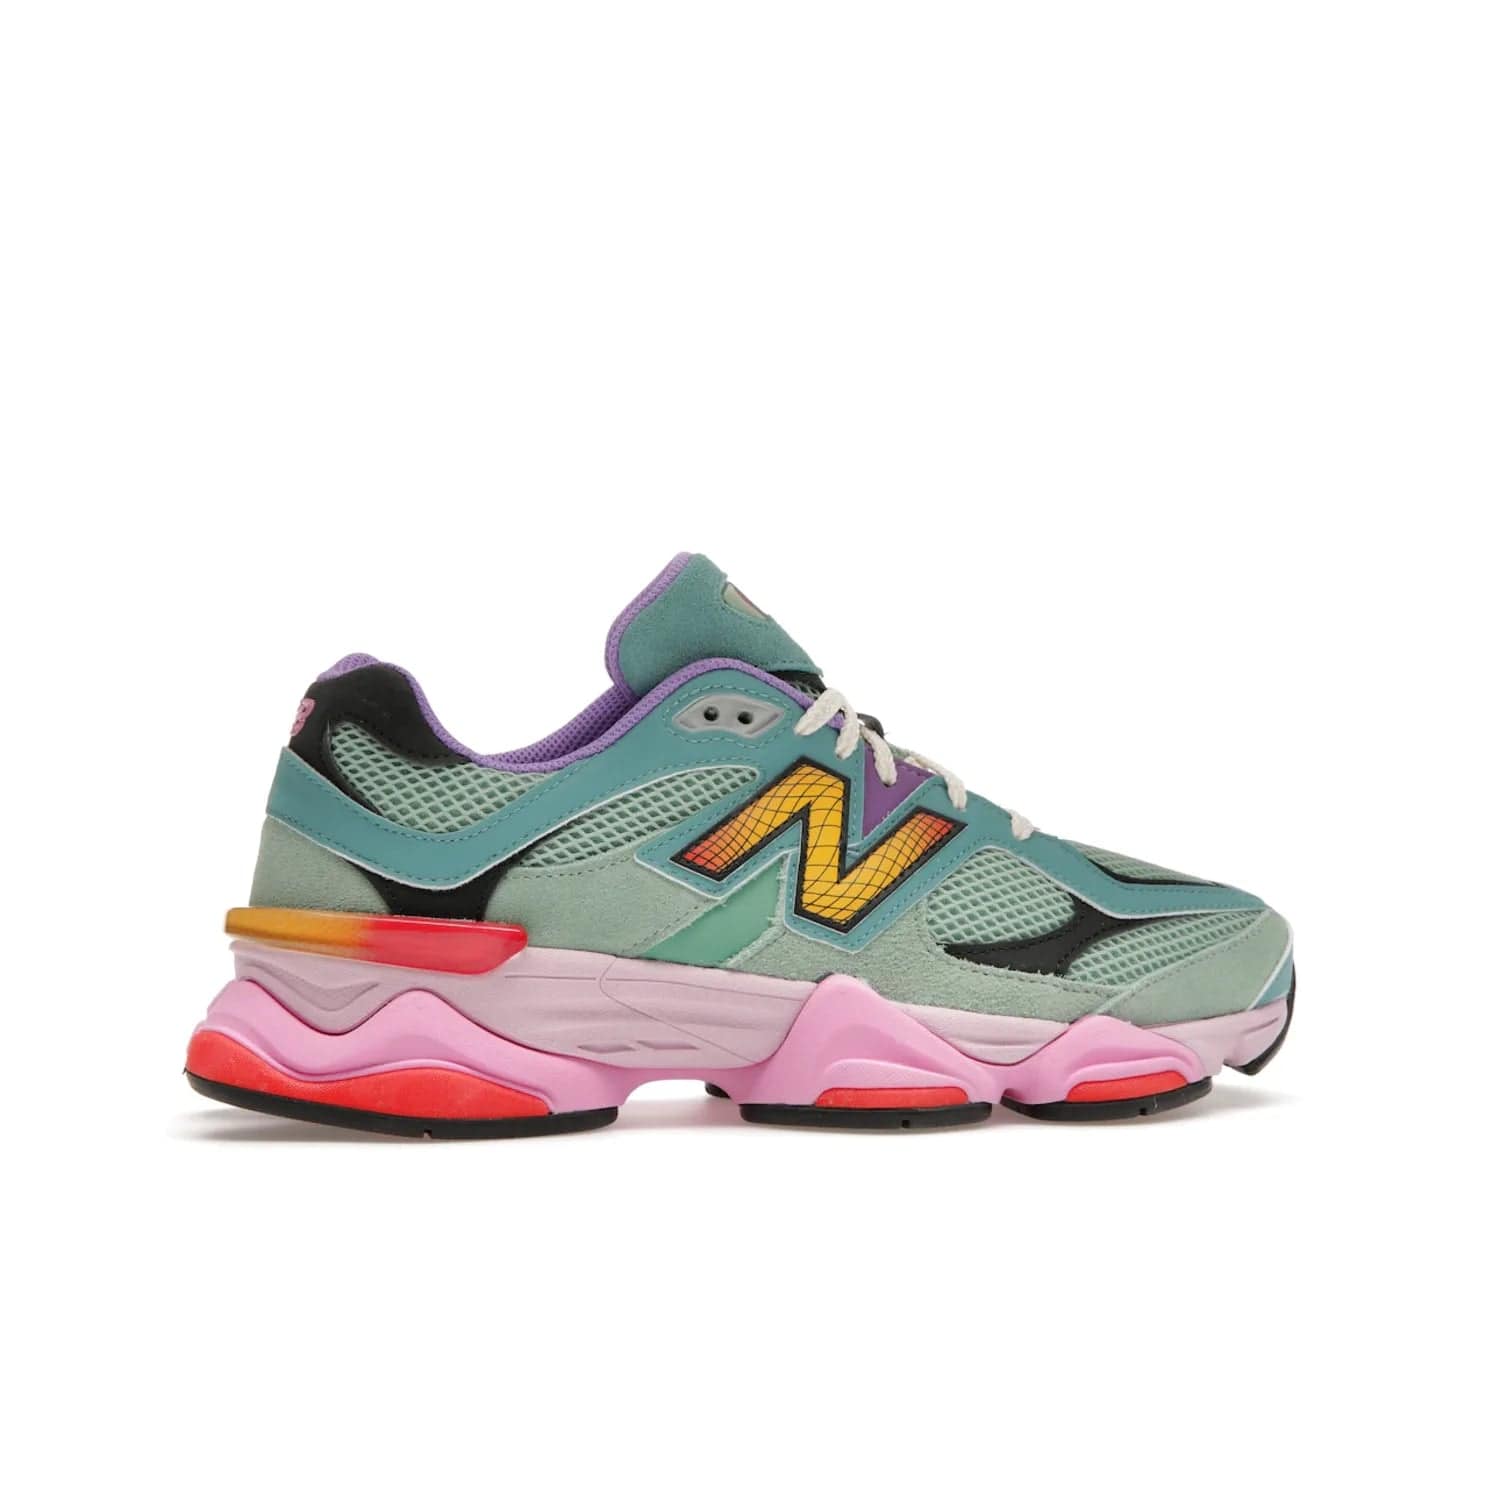 New Balance 9060 Warped Multi-Color - Image 36 - Only at www.BallersClubKickz.com - Enhance your style with the new New Balance 9060 Warped Multi-Colour! Suede overlays, mesh base layer and ABZORB midsole provide comfortable cushioning, while the colourful design ticks all the latest trends. Nylon laces offer an adjustable fit for maximum convenience. Debuting on March 31, 2023 - a must-have addition to your sneaker collection.